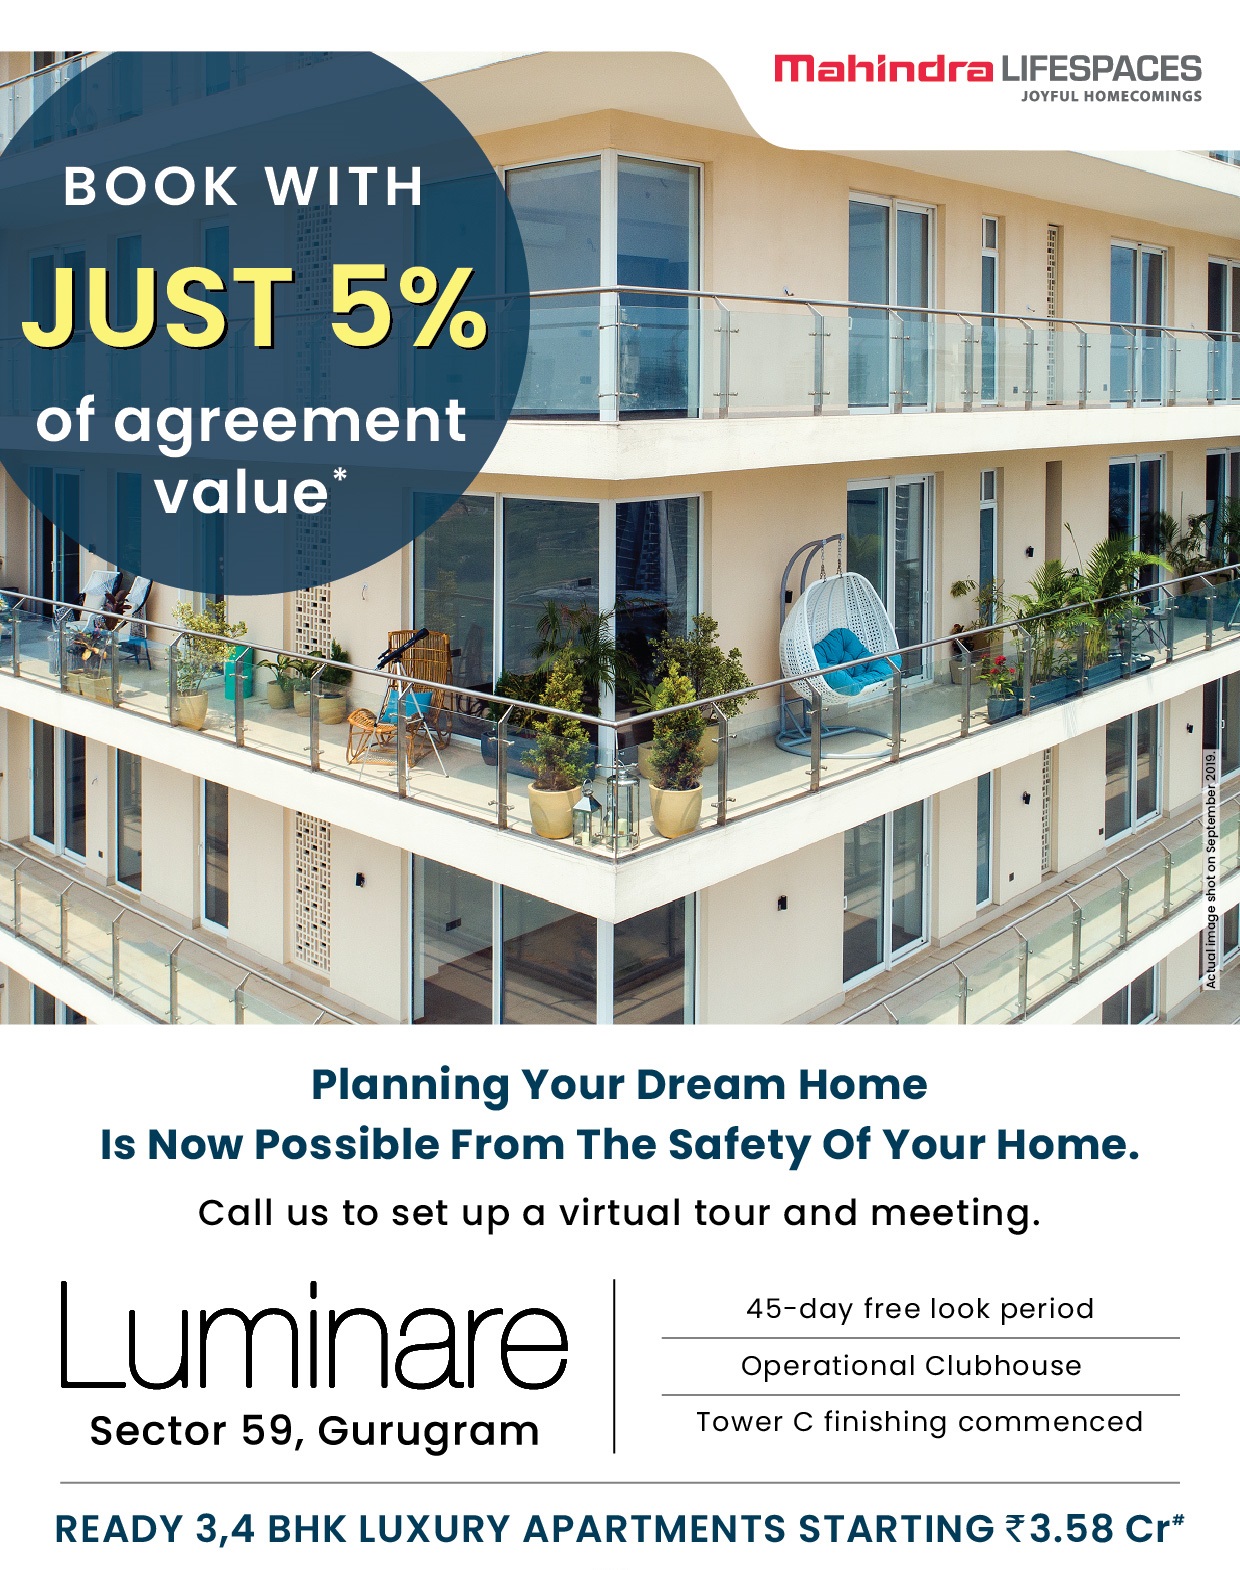 Book with just 5% of agreement value at Mahindra Luminare, Gurgaon Update